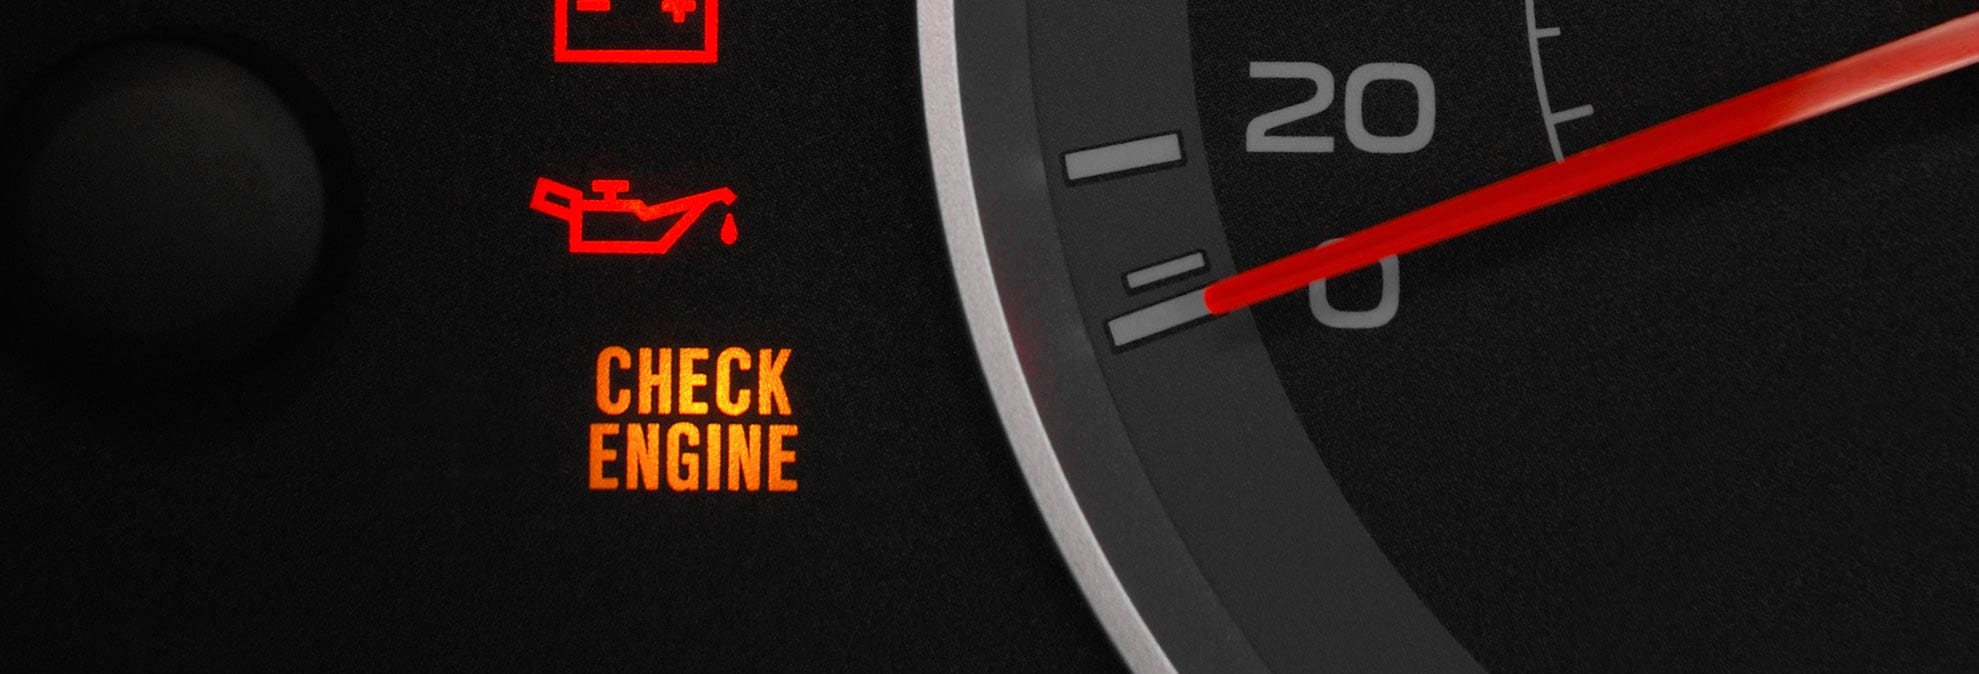 What Does the Check Engine Light Mean? - Consumer Reports